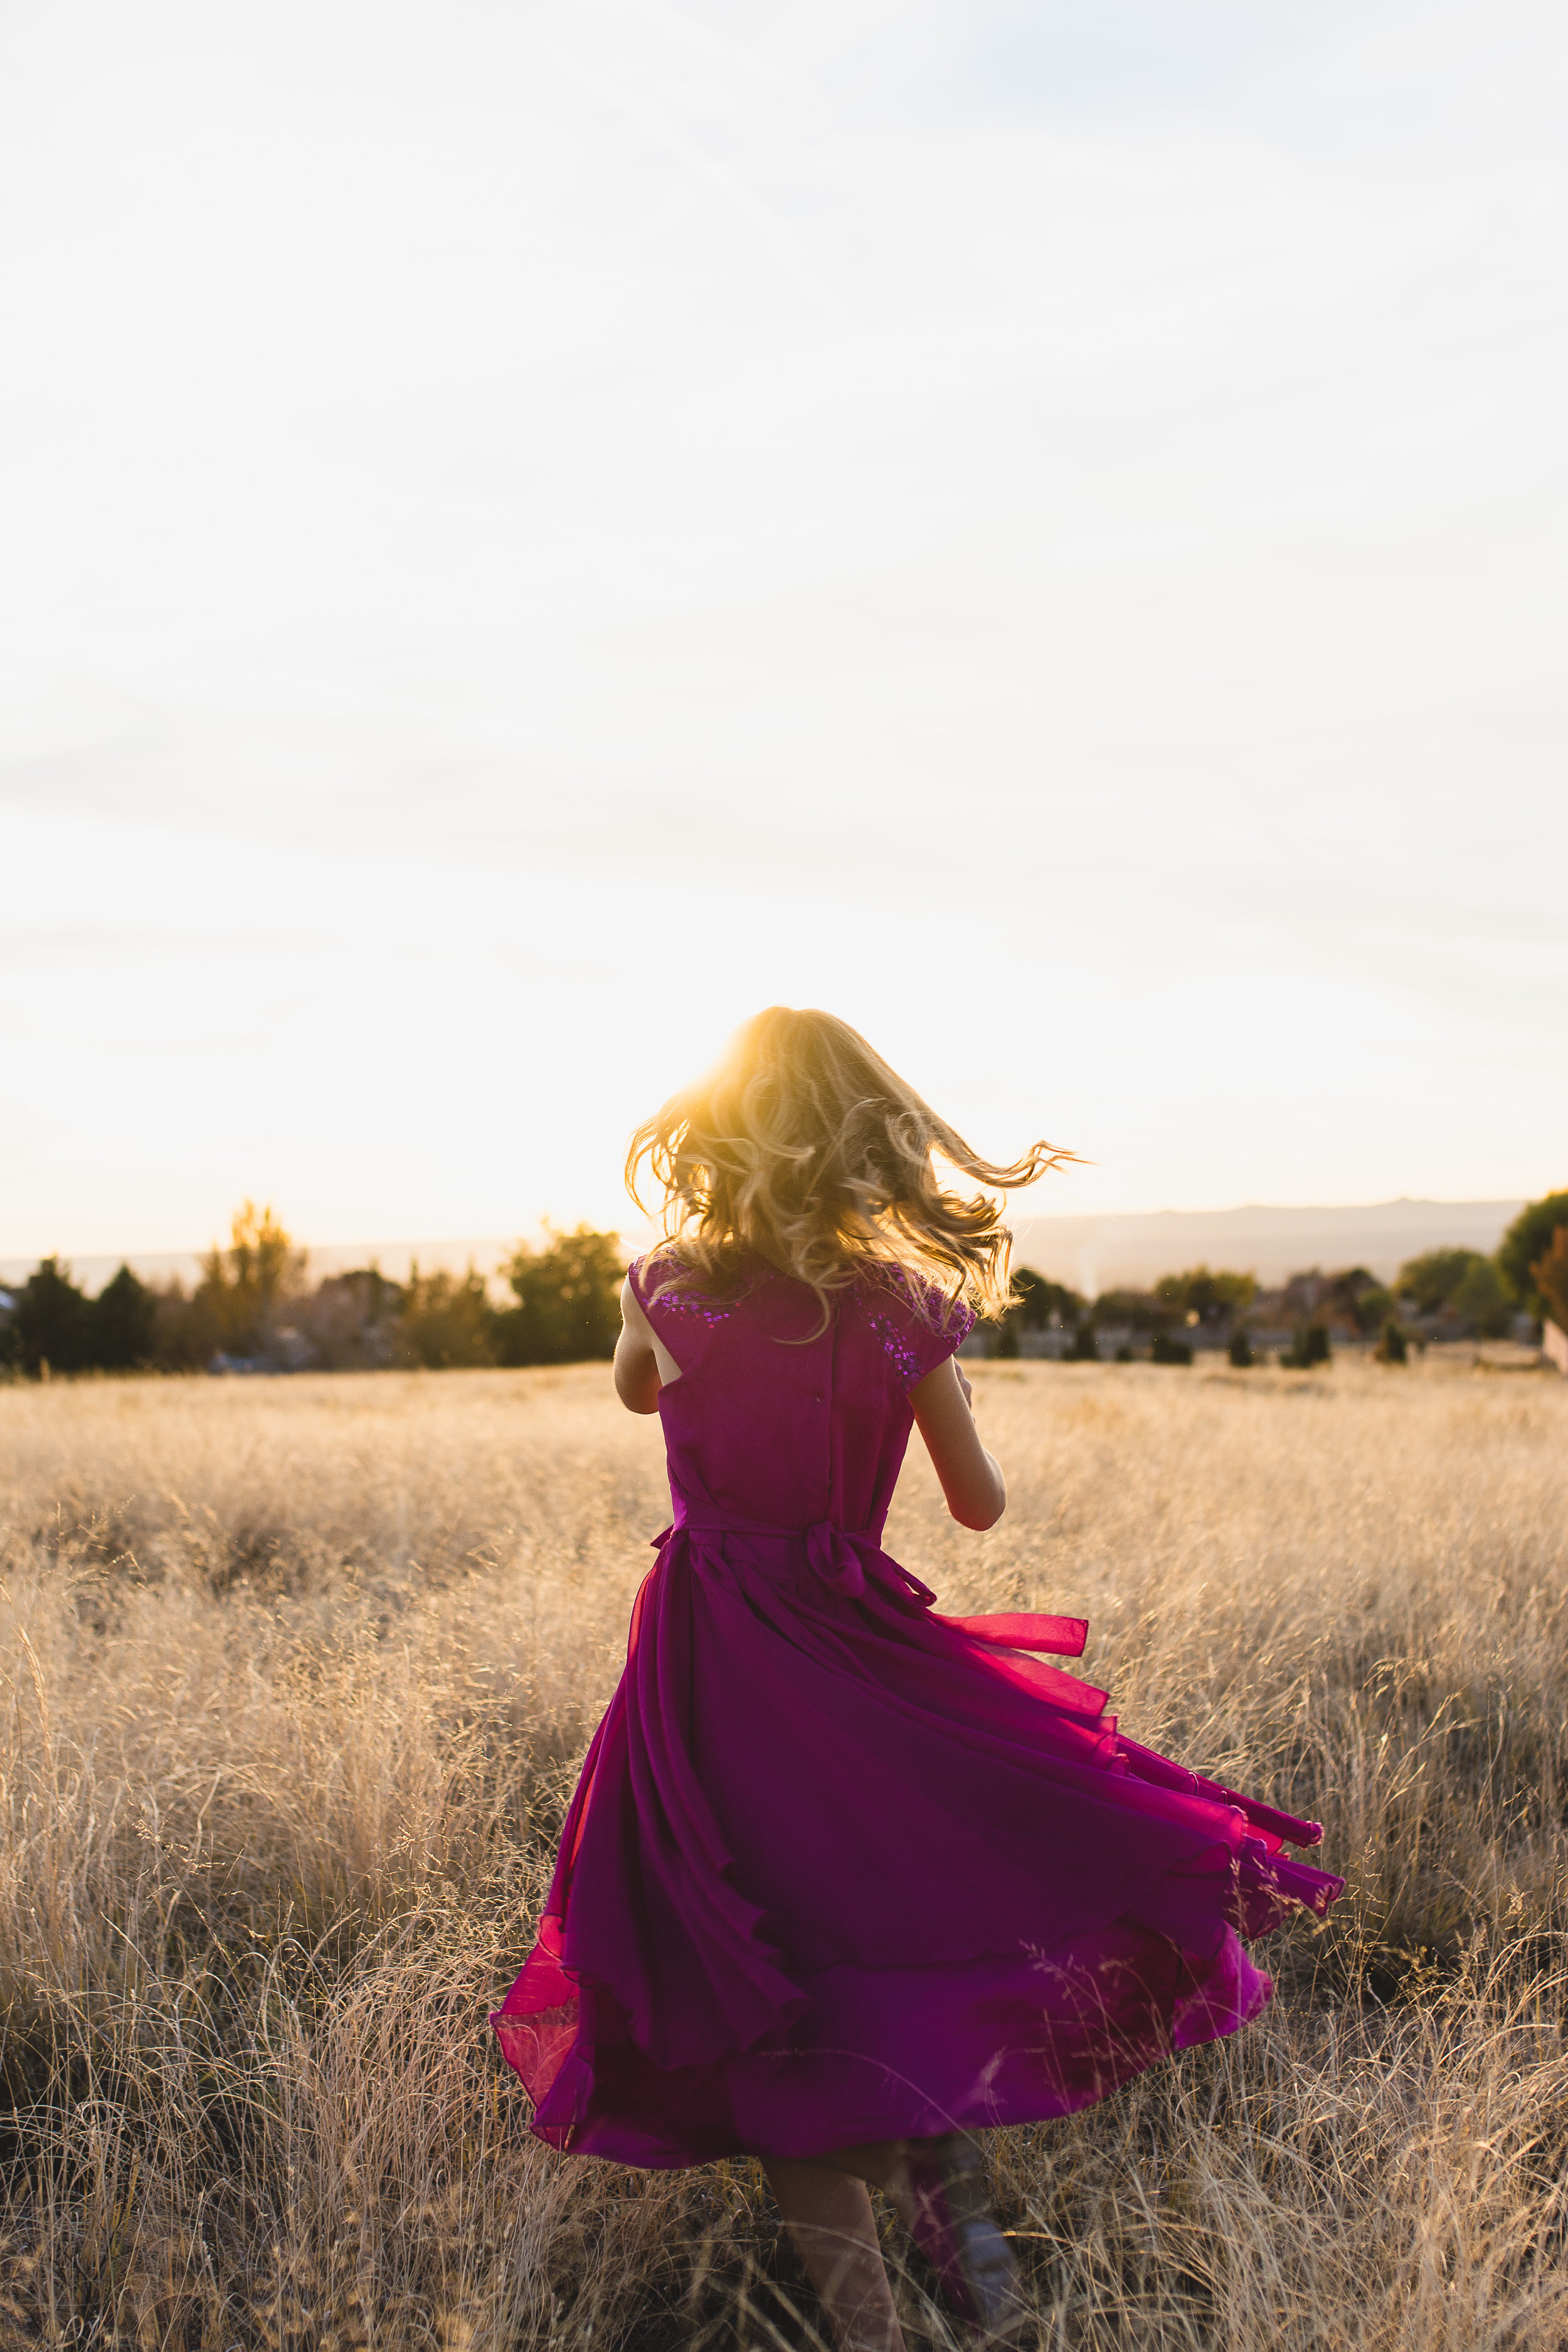 Girl twirling in pink dress in yellow sun-drenched field in Albuquerque